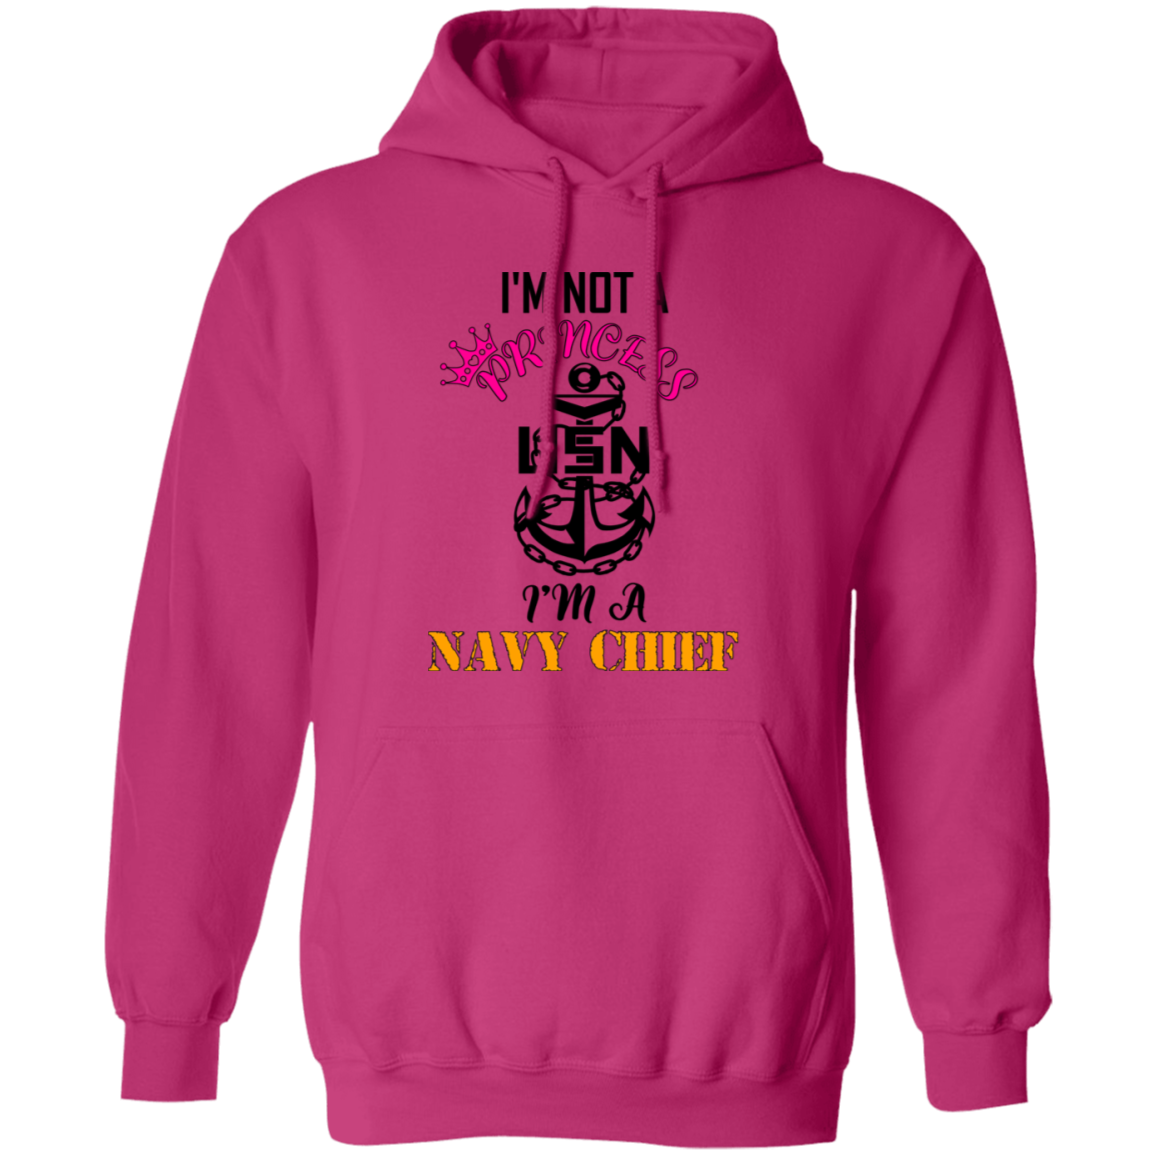 I'm not a Princess V2 Pullover Hoodie